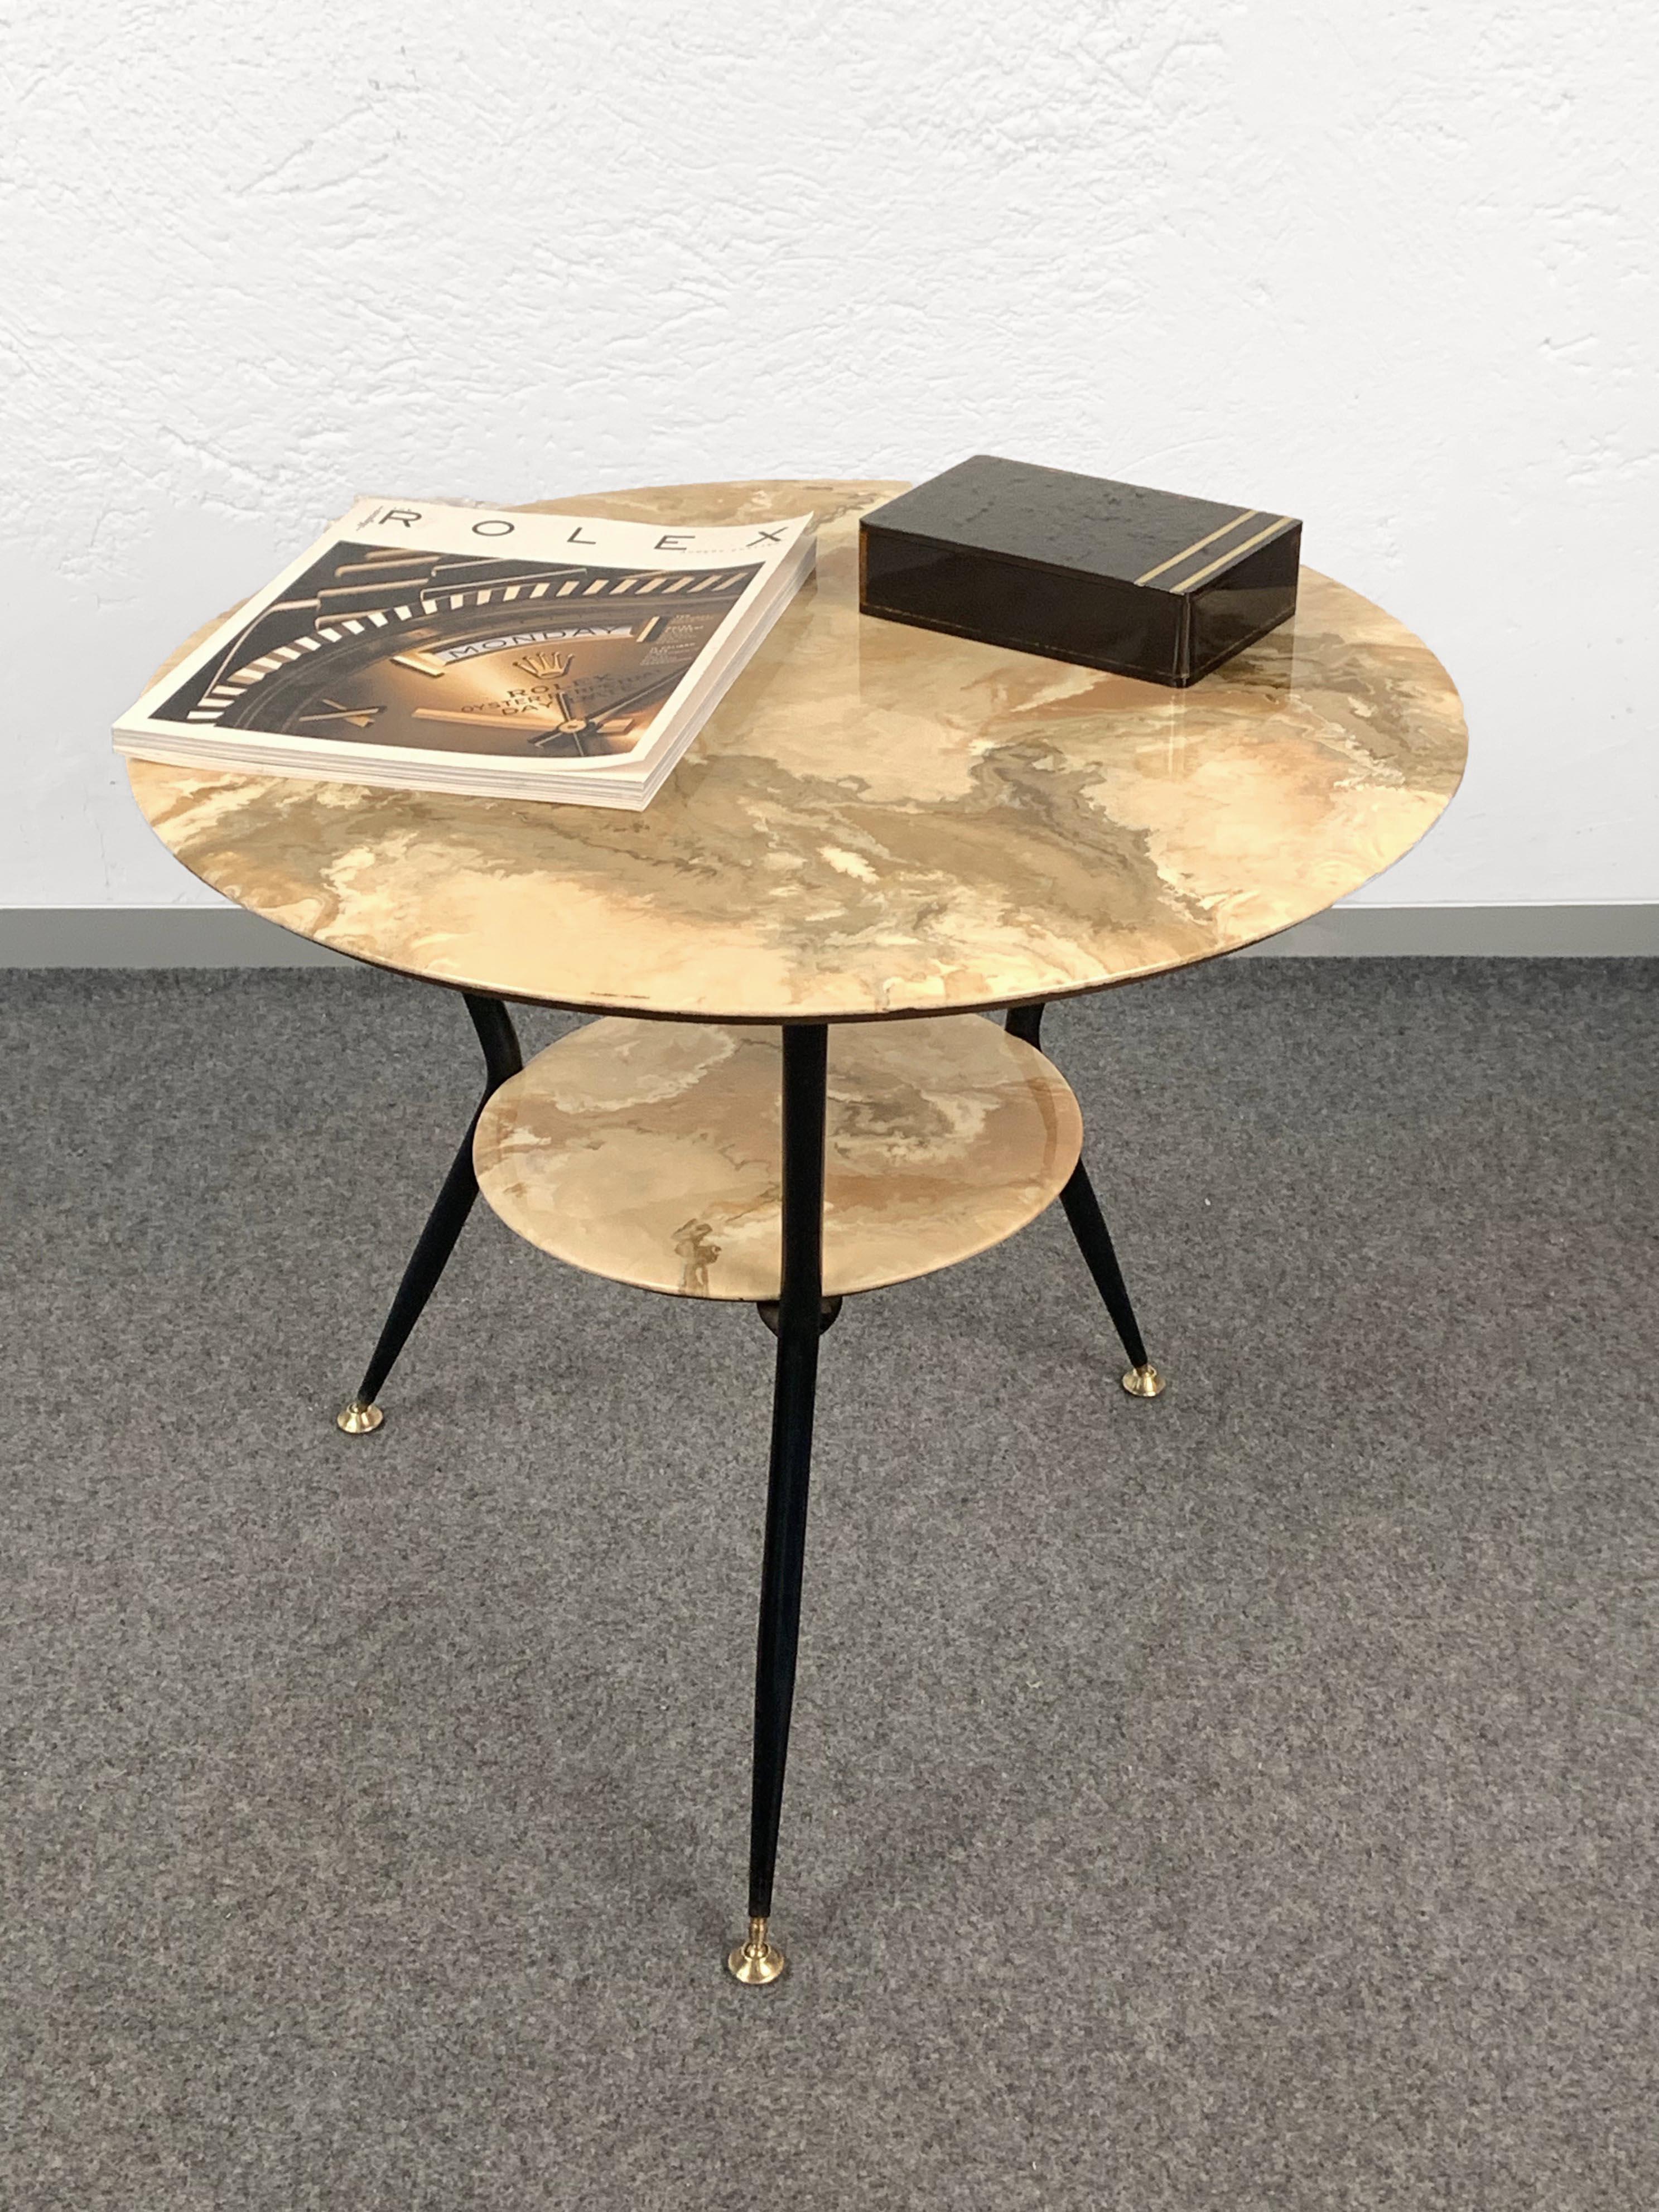 Wonderful midcentury marbled wooden base and lacquered black metal legs coffee table. It has two levels with varnished round bases, indicating a 1950s Italian production, 1950s, Italy.

It is a superb side or living room table with very elegant